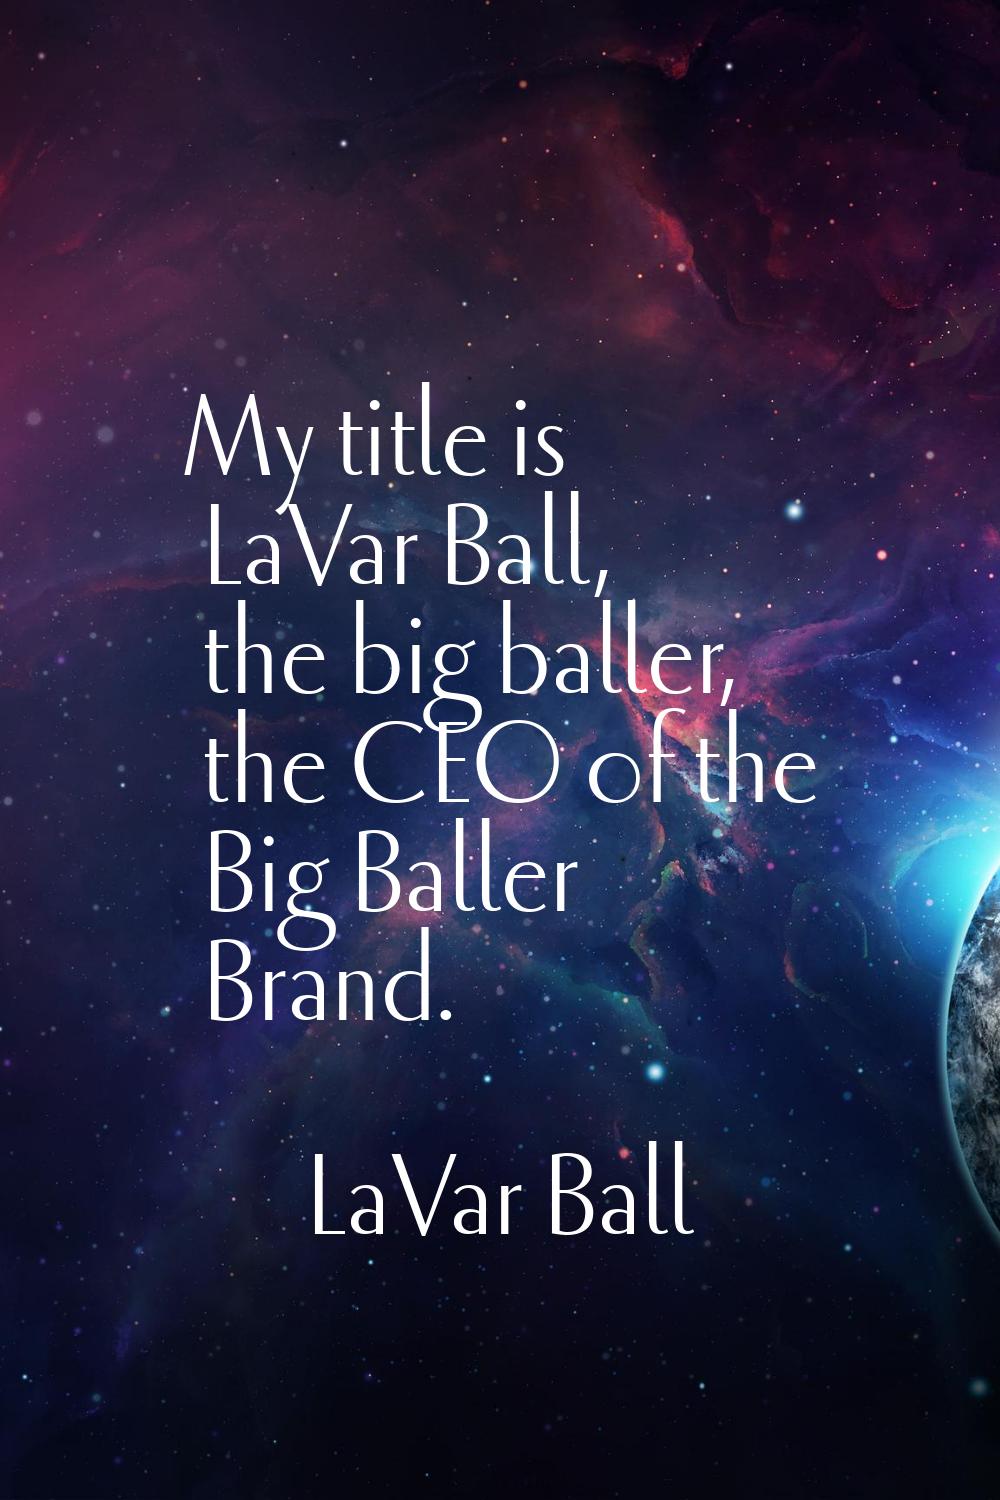 My title is LaVar Ball, the big baller, the CEO of the Big Baller Brand.